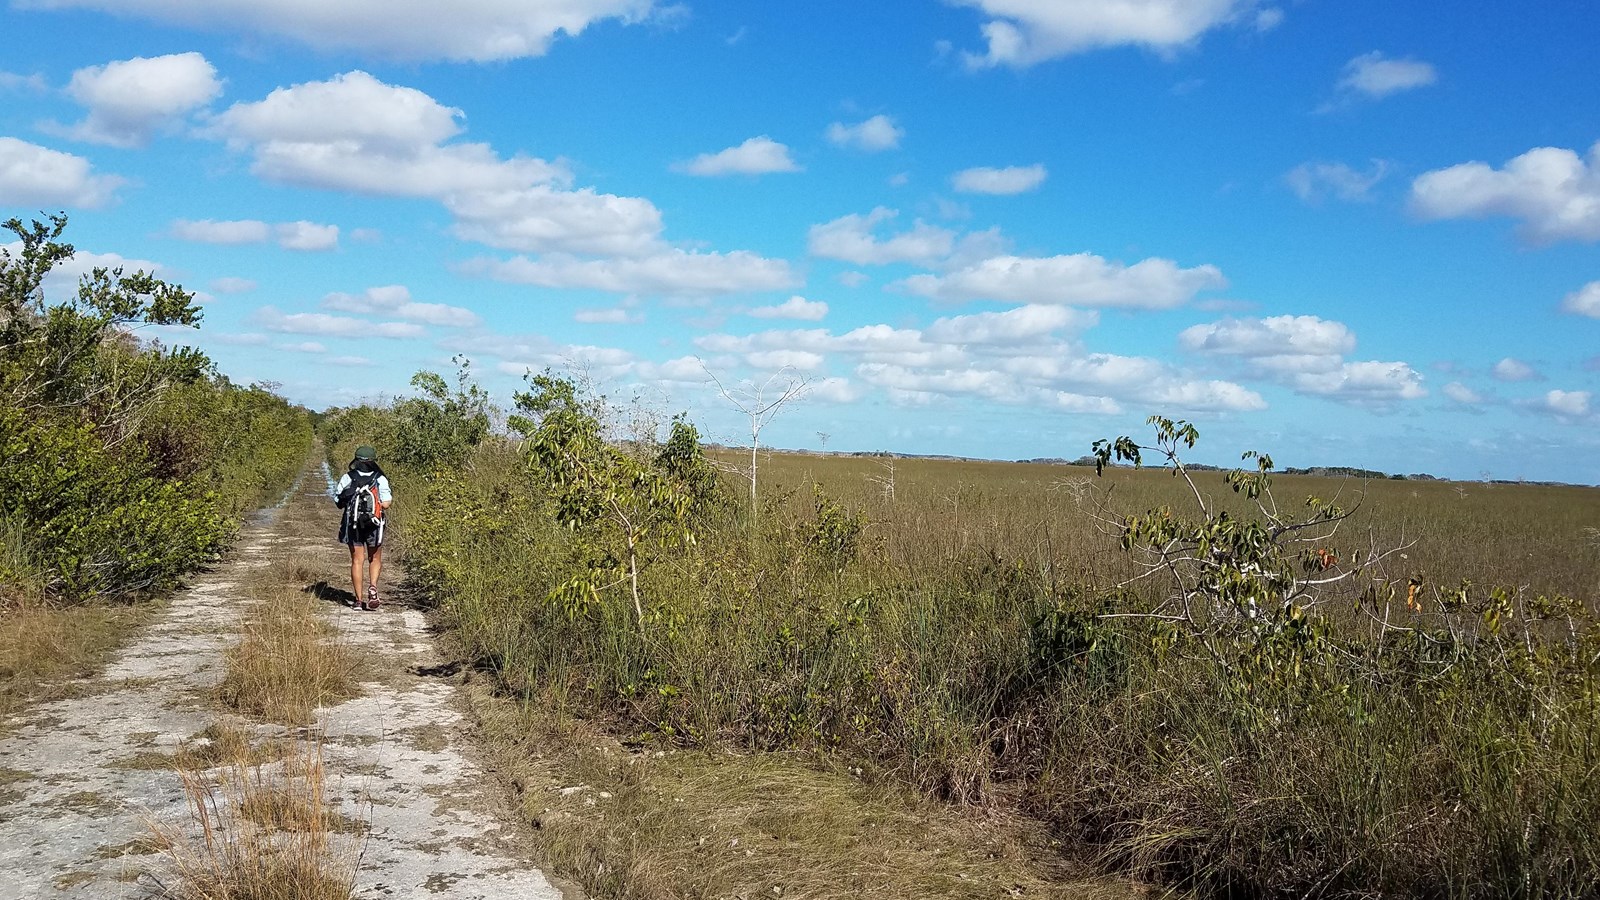 A hiker on a trail flanked by shrubby green trees on the left and open sawgrass on the right